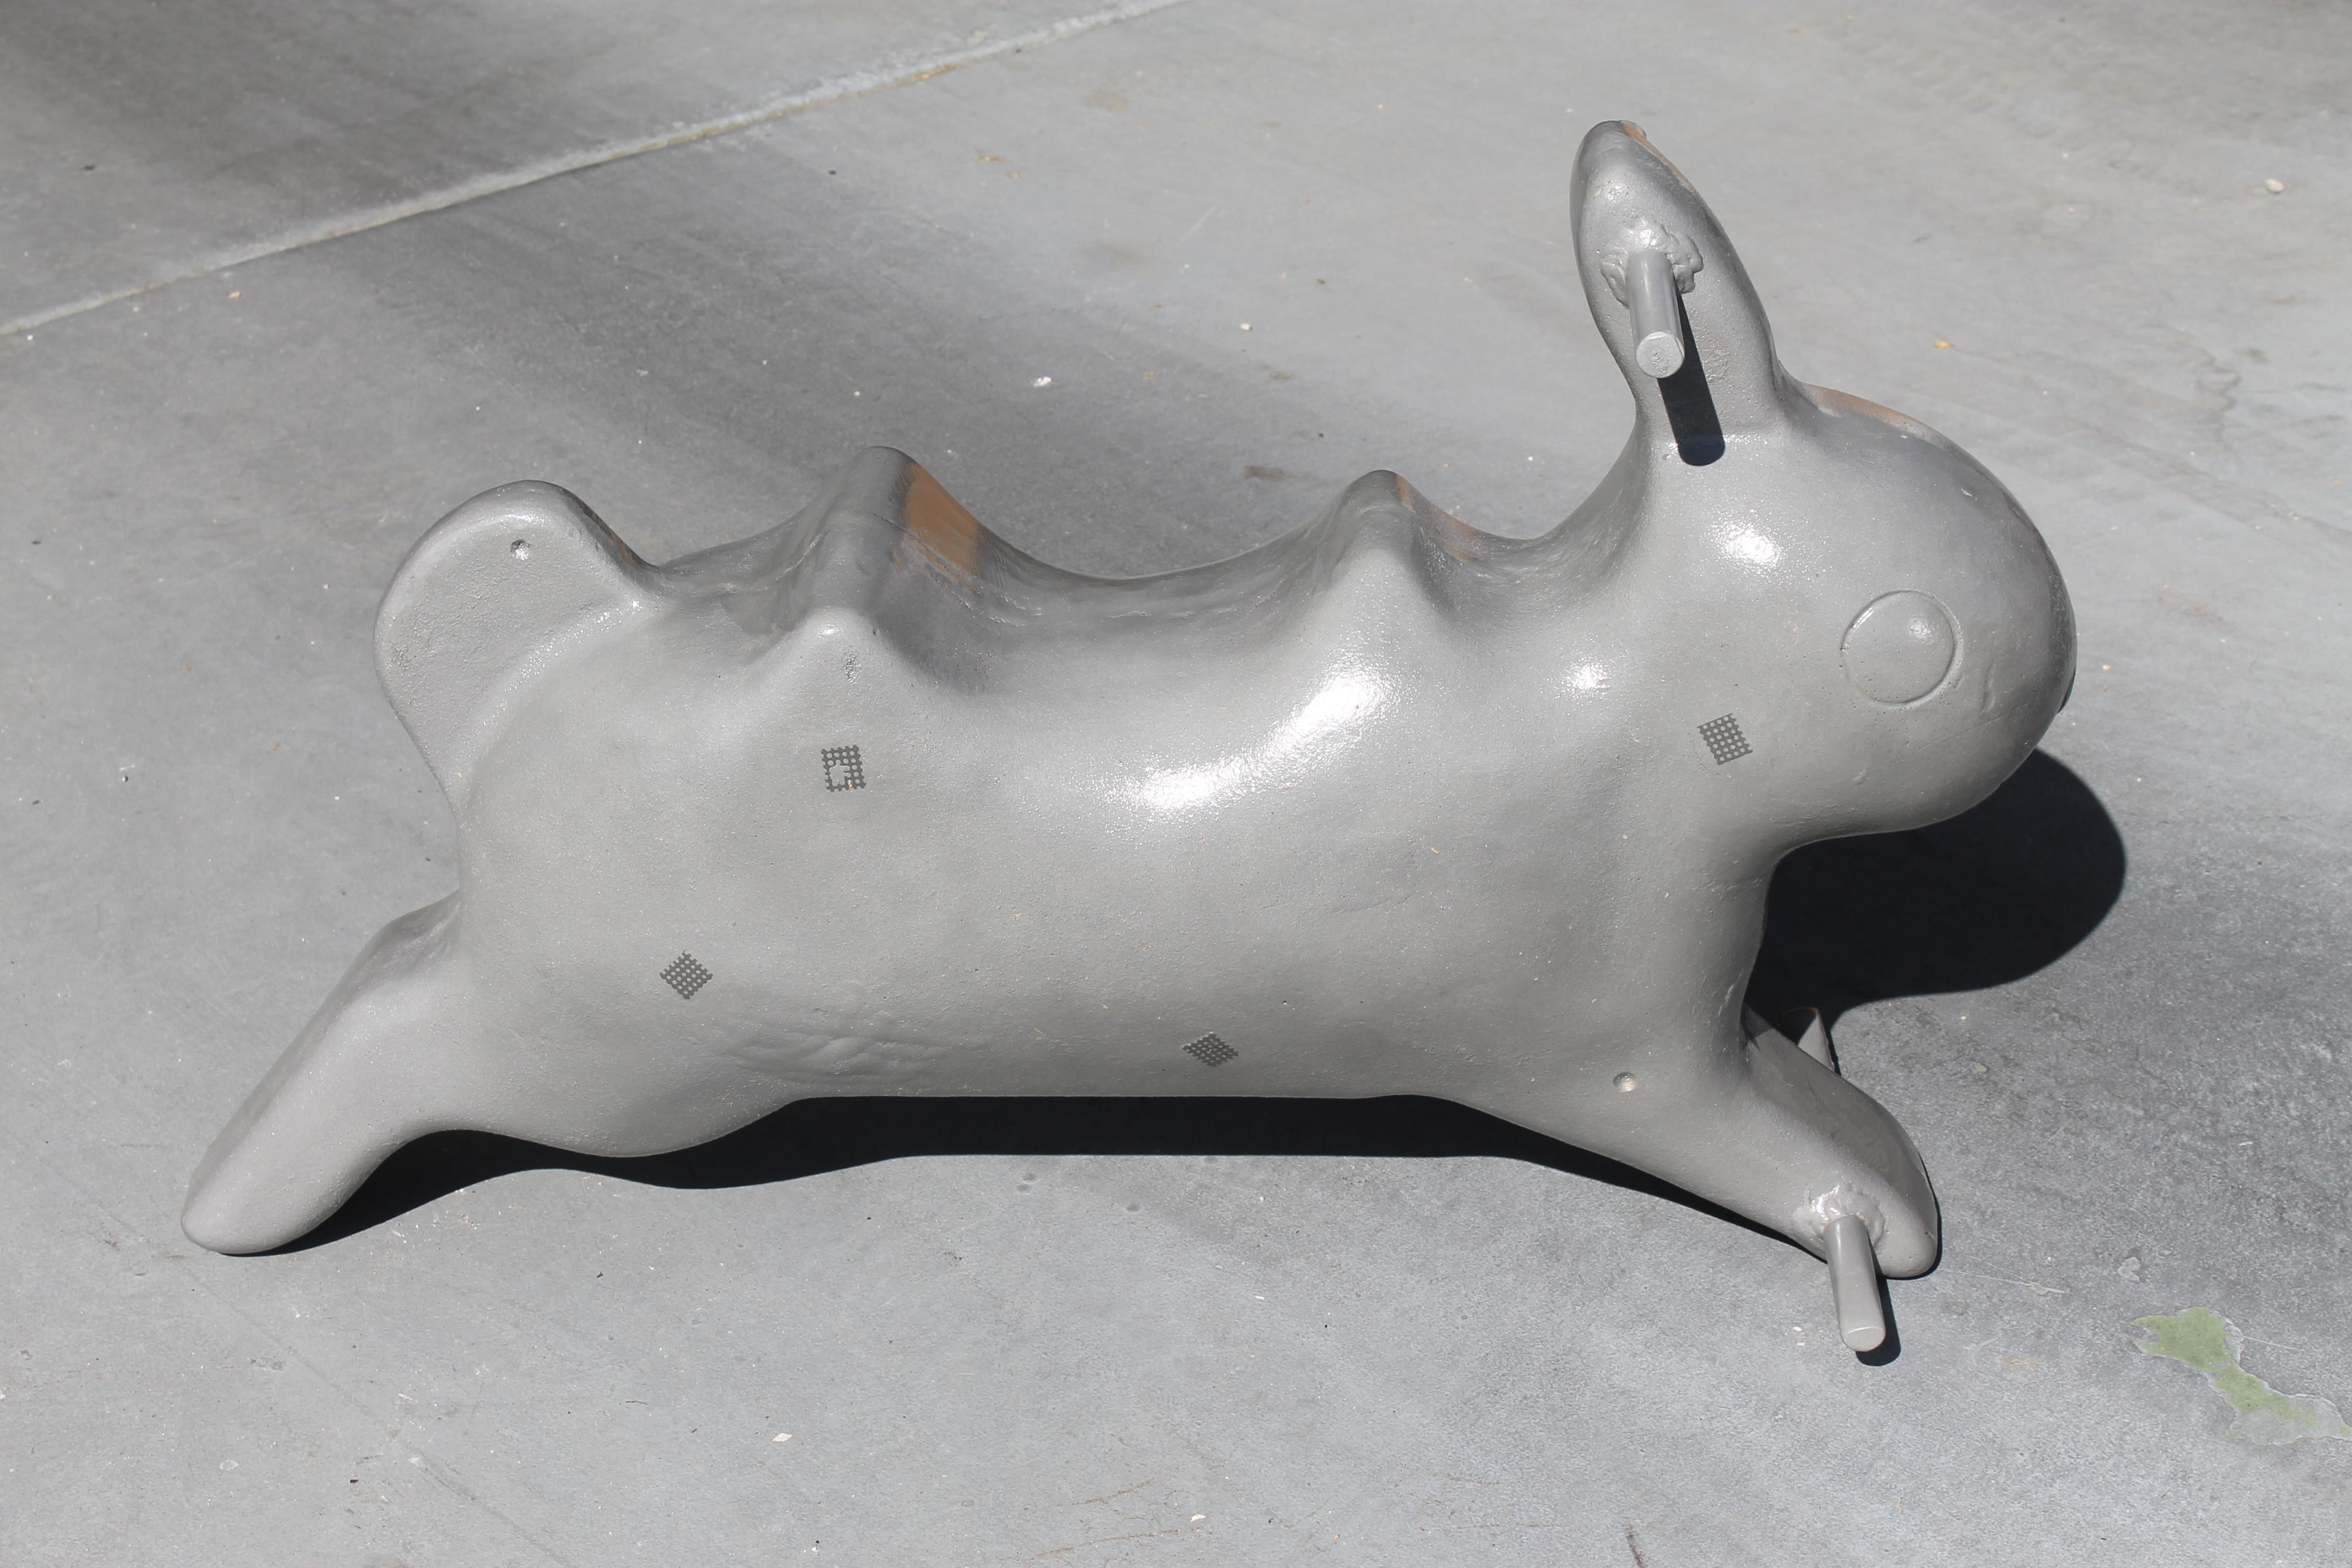 This aluminum rabbit sculpture was originally a playground spring ride located throughout parks. Spring is not included. It's more sculptural and part of Americana history. We had it sand blasted and clear coated. Rabbit measures 33